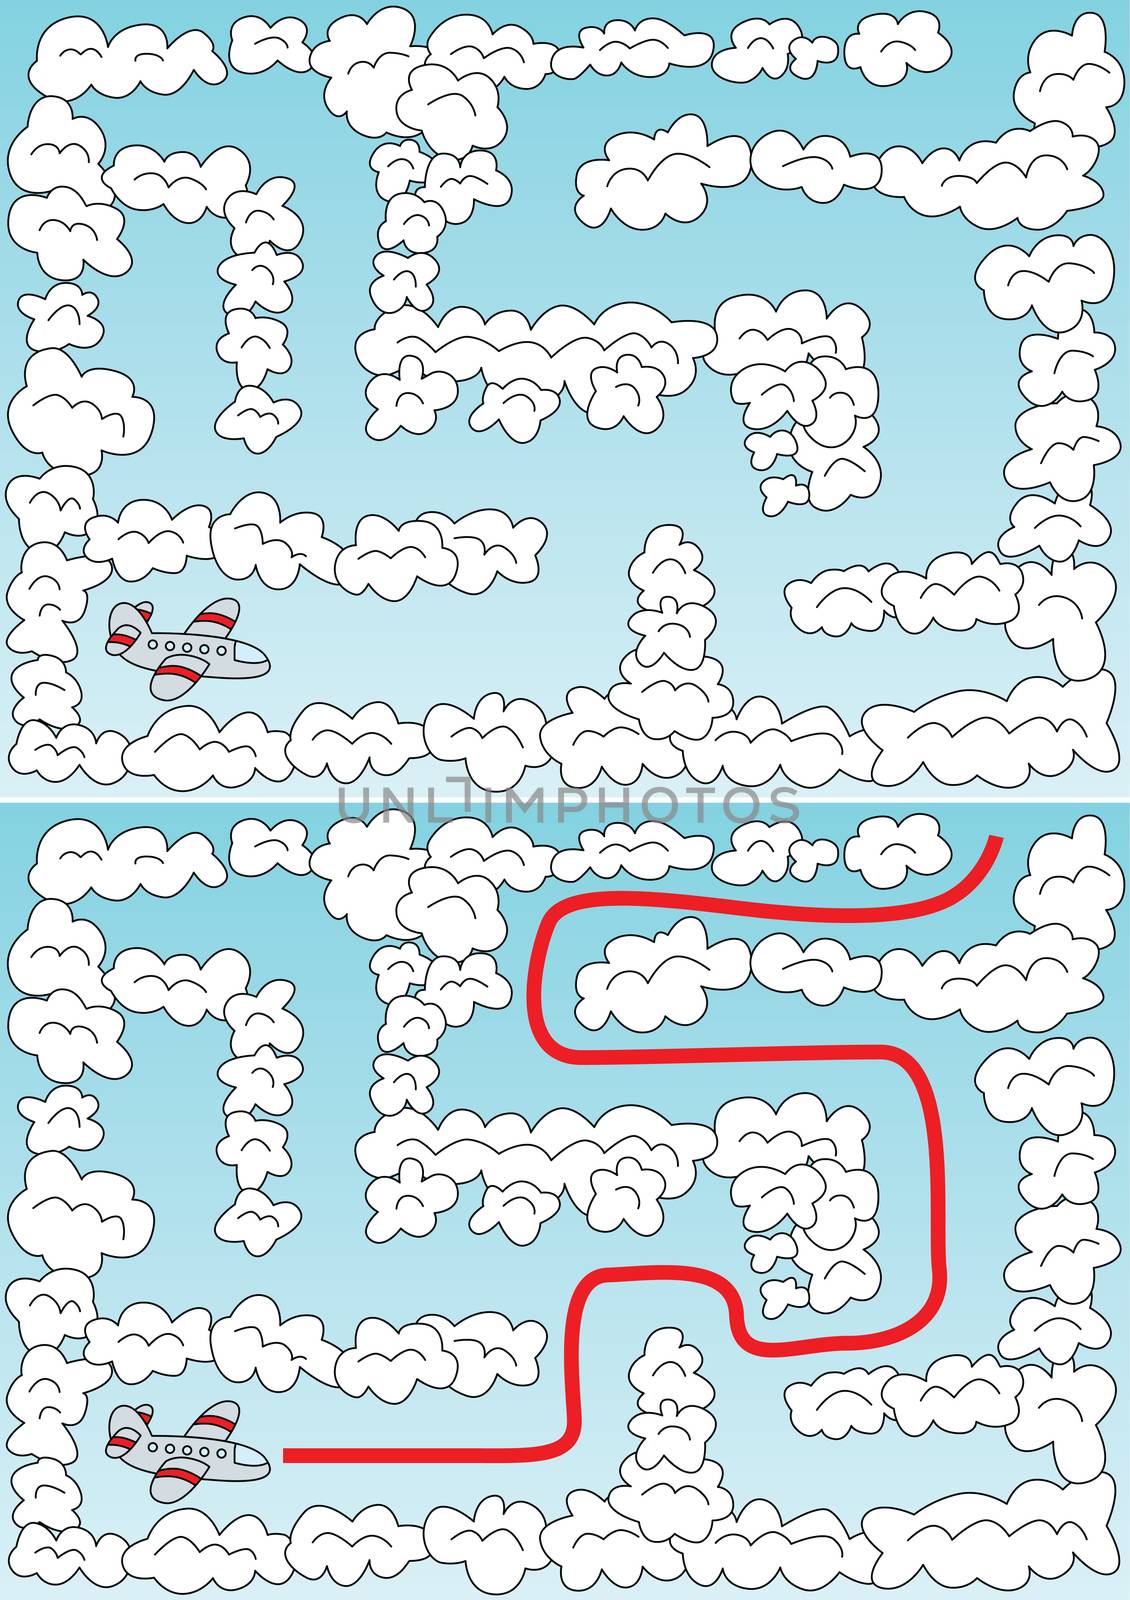 Easy airplane maze by nahhan